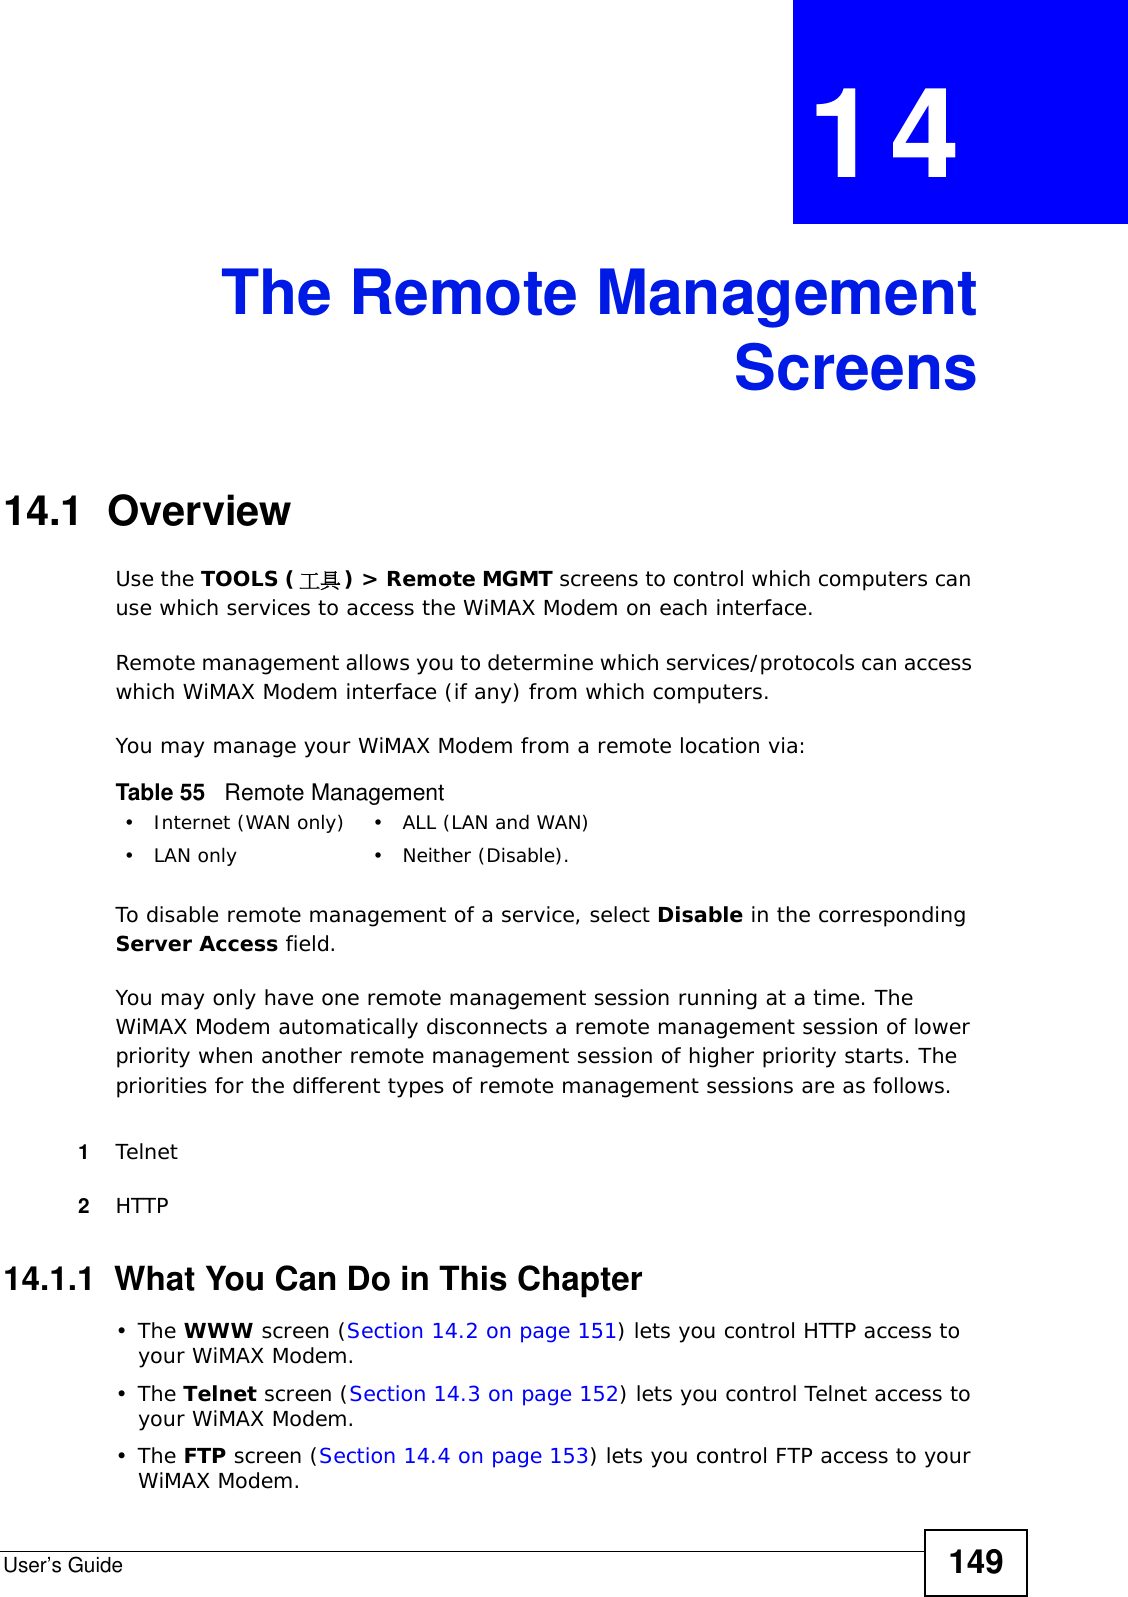 User’s Guide 149CHAPTER  14 The Remote ManagementScreens14.1  OverviewUse the TOOLS (工具) &gt; Remote MGMT screens to control which computers can use which services to access the WiMAX Modem on each interface.Remote management allows you to determine which services/protocols can access which WiMAX Modem interface (if any) from which computers.You may manage your WiMAX Modem from a remote location via:To disable remote management of a service, select Disable in the corresponding Server Access field.You may only have one remote management session running at a time. The WiMAX Modem automatically disconnects a remote management session of lower priority when another remote management session of higher priority starts. The priorities for the different types of remote management sessions are as follows.1Telnet2HTTP14.1.1  What You Can Do in This Chapter•The WWW screen (Section 14.2 on page 151) lets you control HTTP access to your WiMAX Modem.•The Telnet screen (Section 14.3 on page 152) lets you control Telnet access to your WiMAX Modem.•The FTP screen (Section 14.4 on page 153) lets you control FTP access to your WiMAX Modem.Table 55   Remote Management• Internet (WAN only) • ALL (LAN and WAN)• LAN only • Neither (Disable).